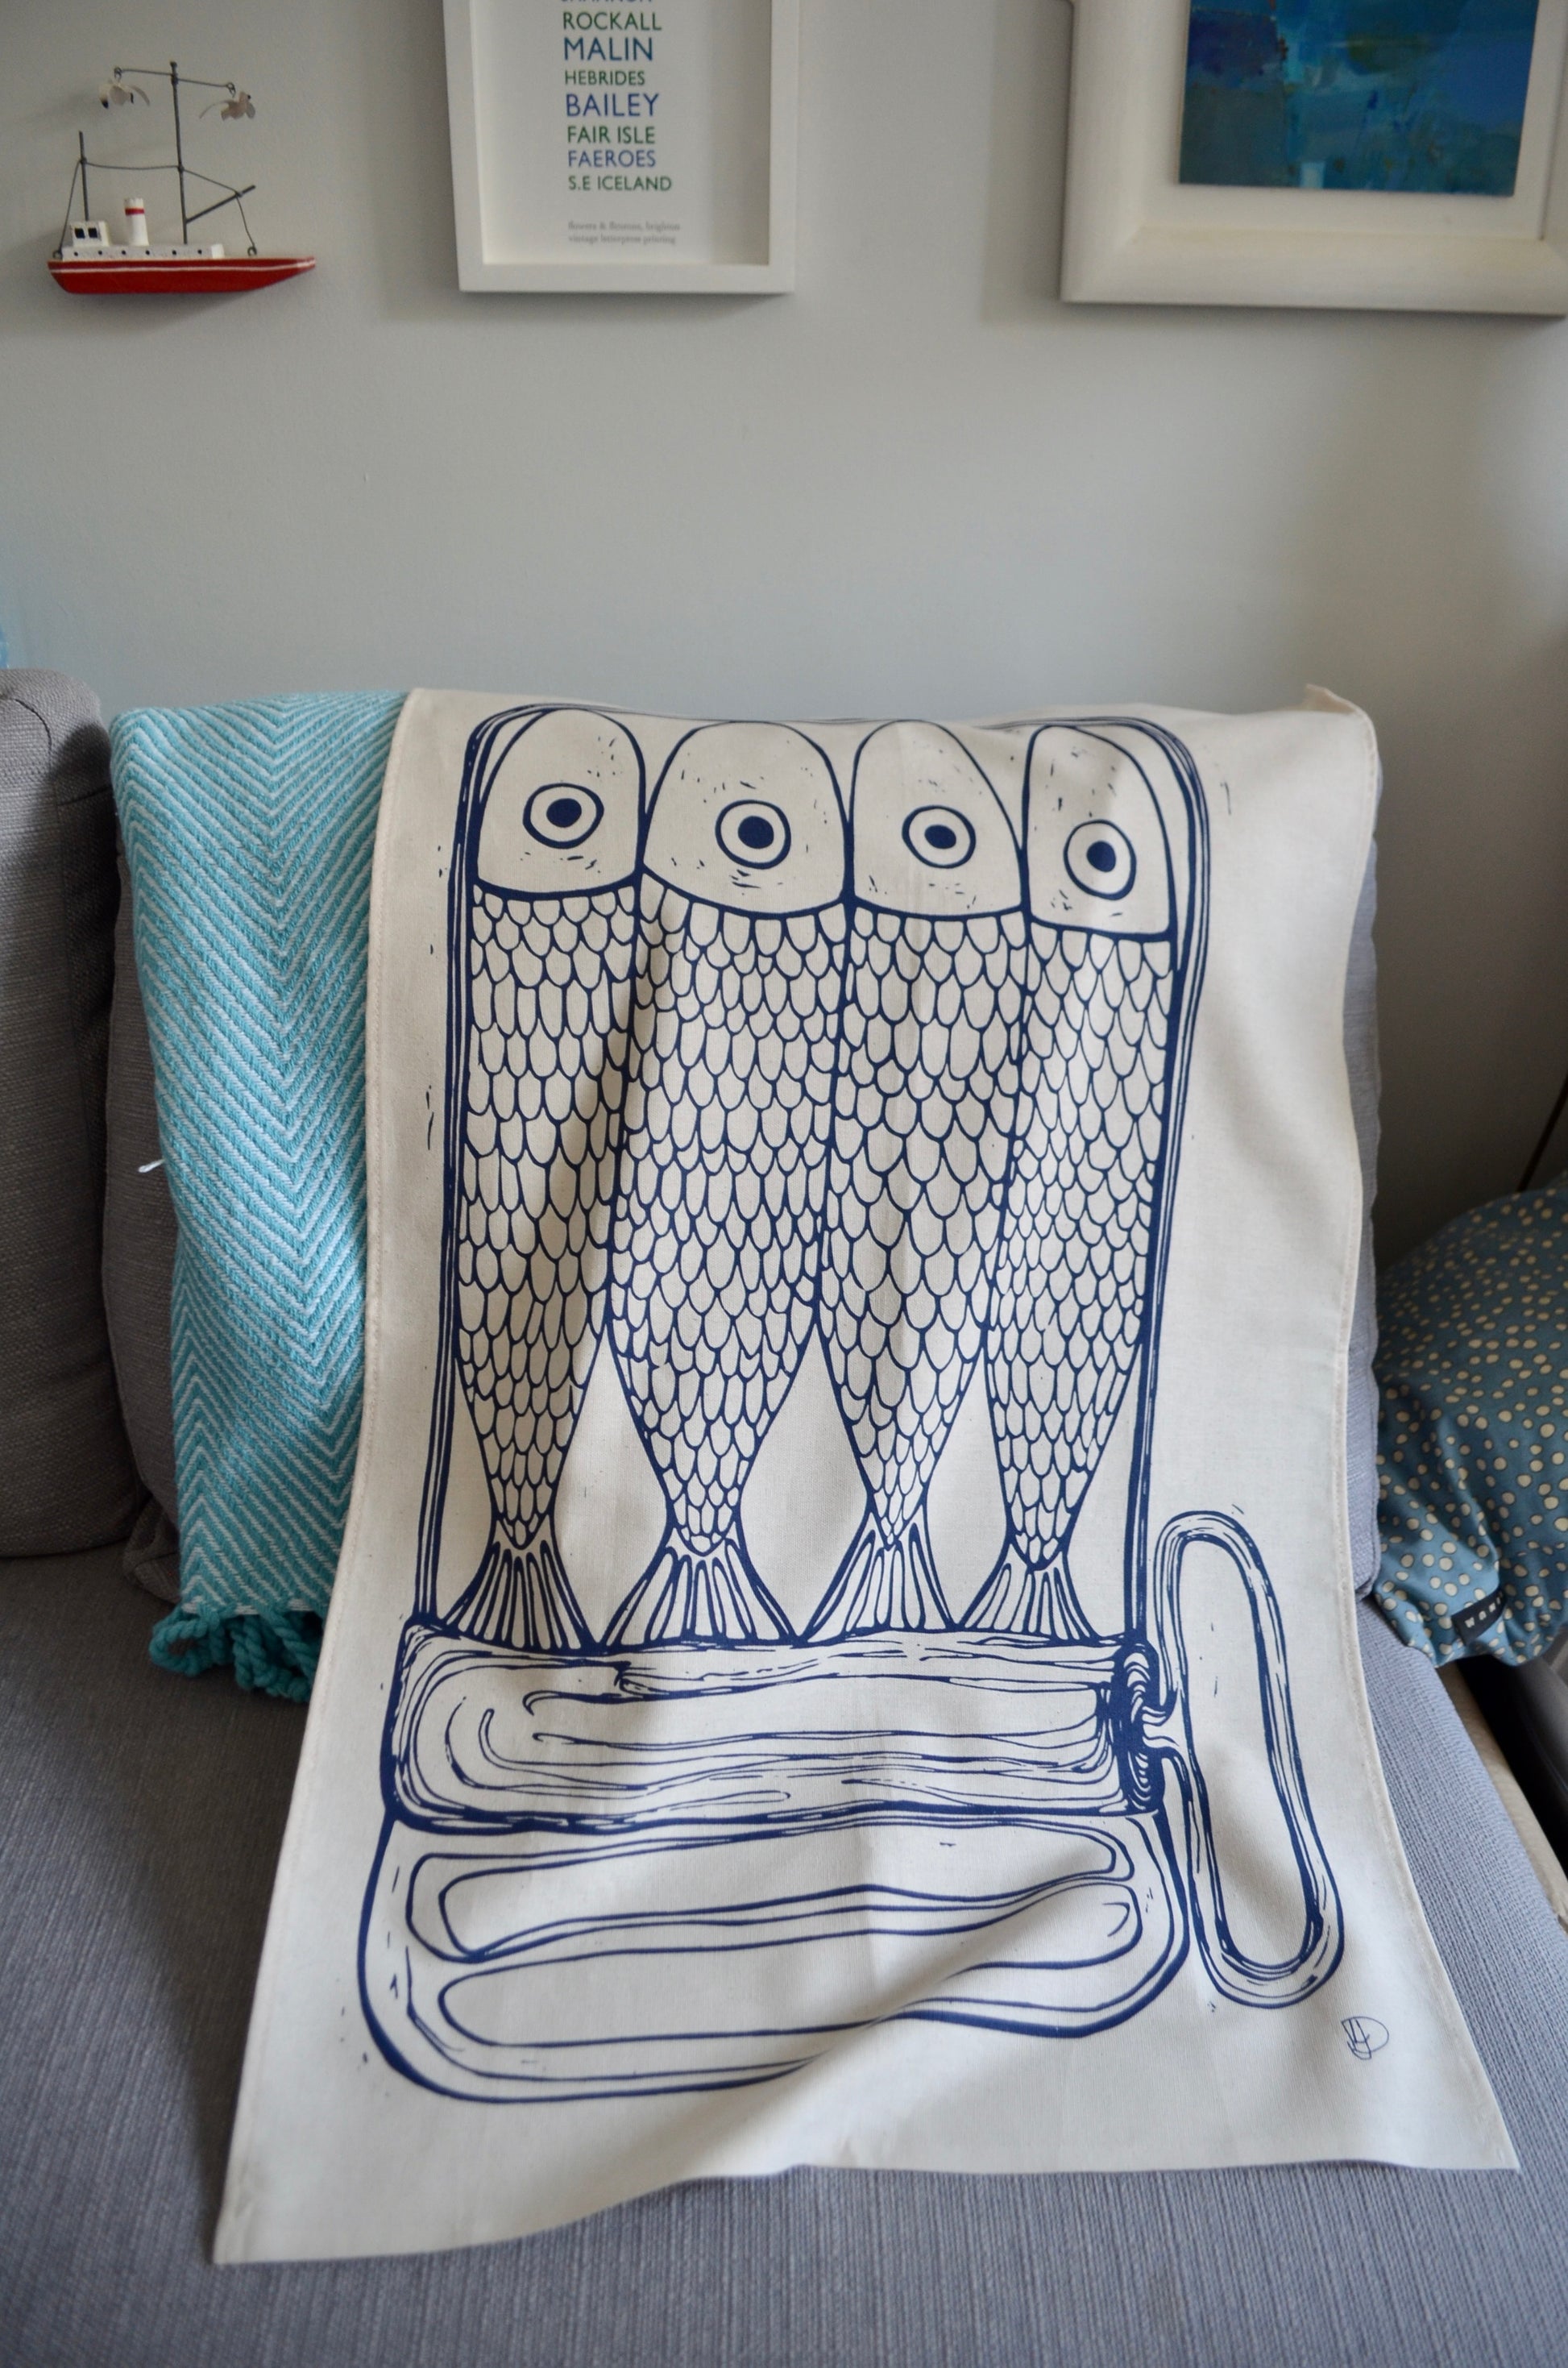 This image shows the tea towel draped in a coastal home, complimenting the grey, blue, and white colour scheme